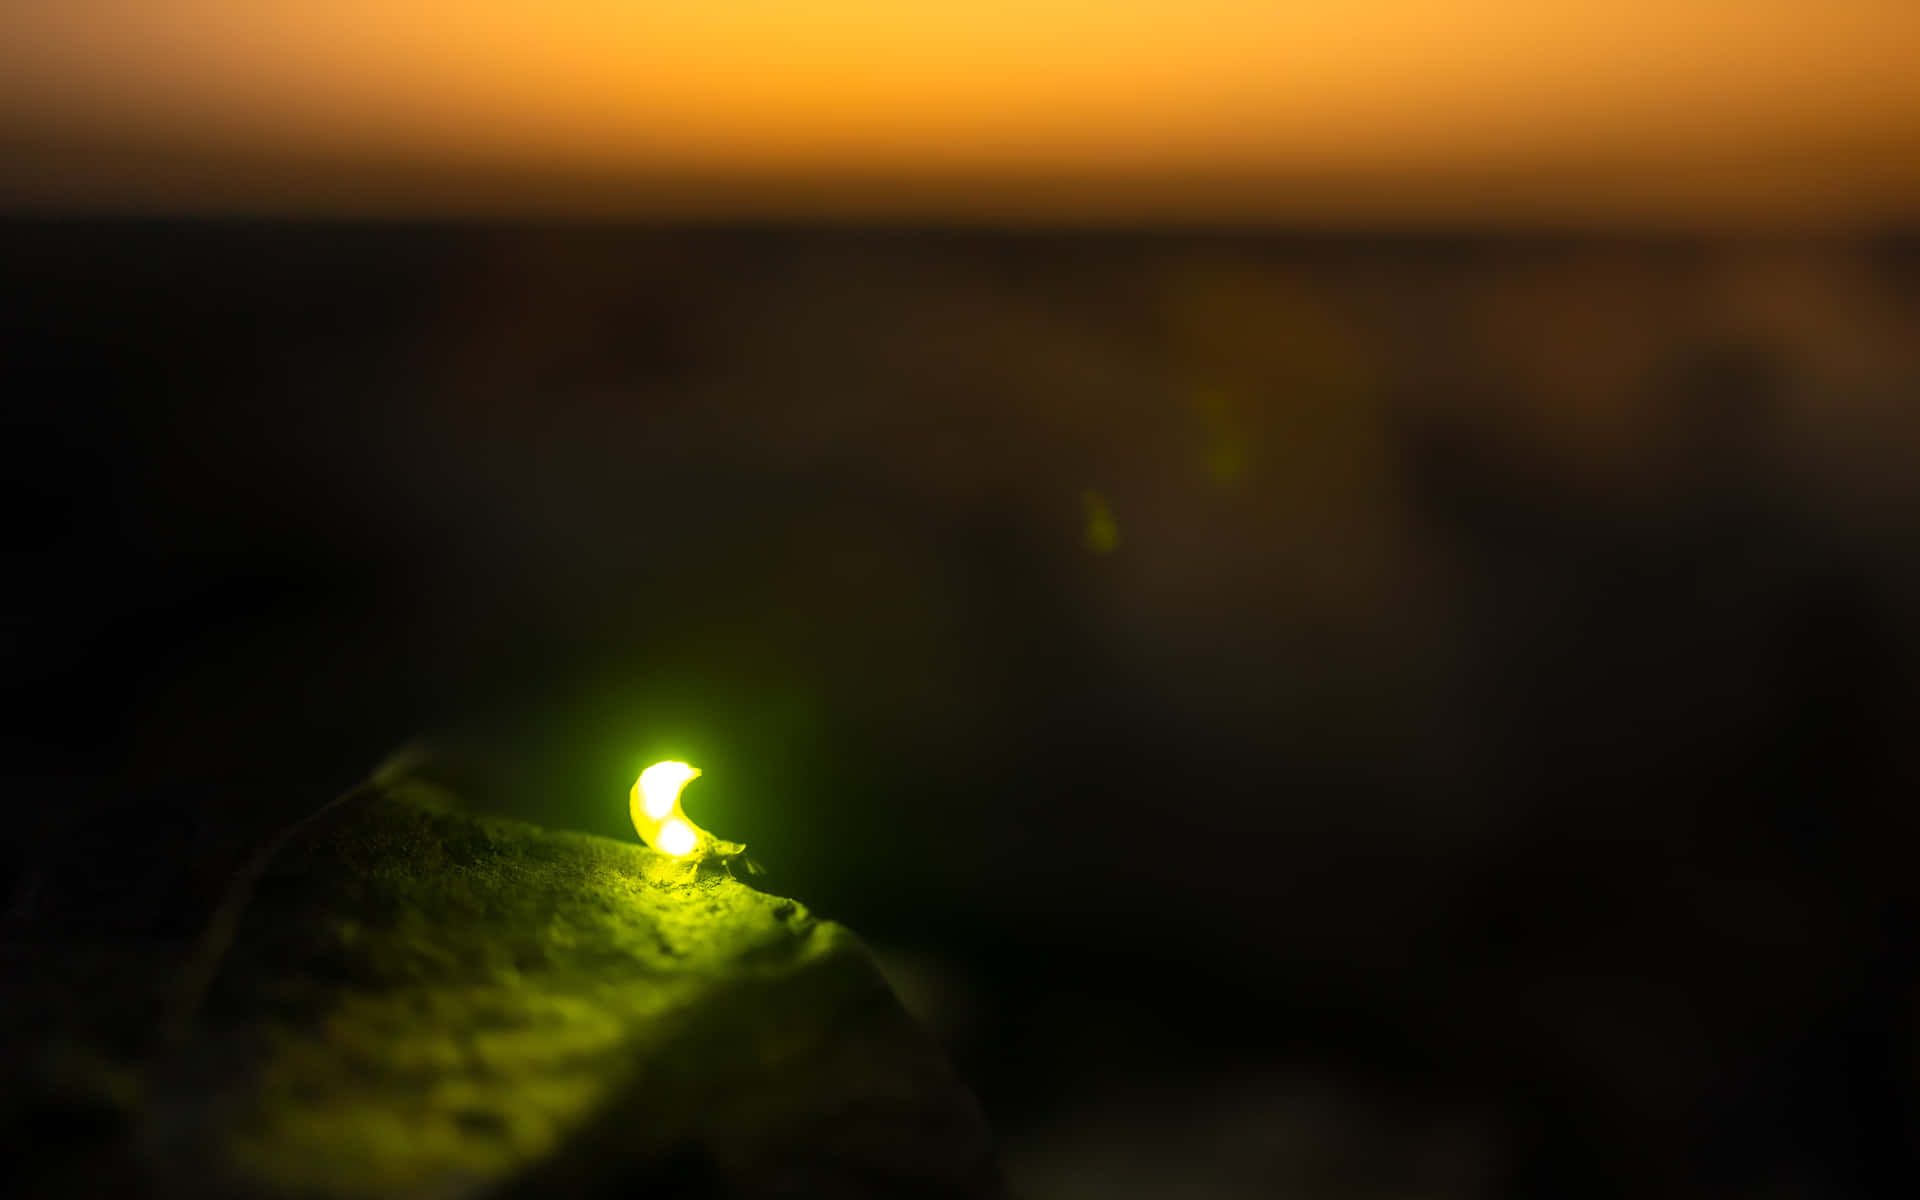 "Discover the natural beauty of wild fireflies" Wallpaper